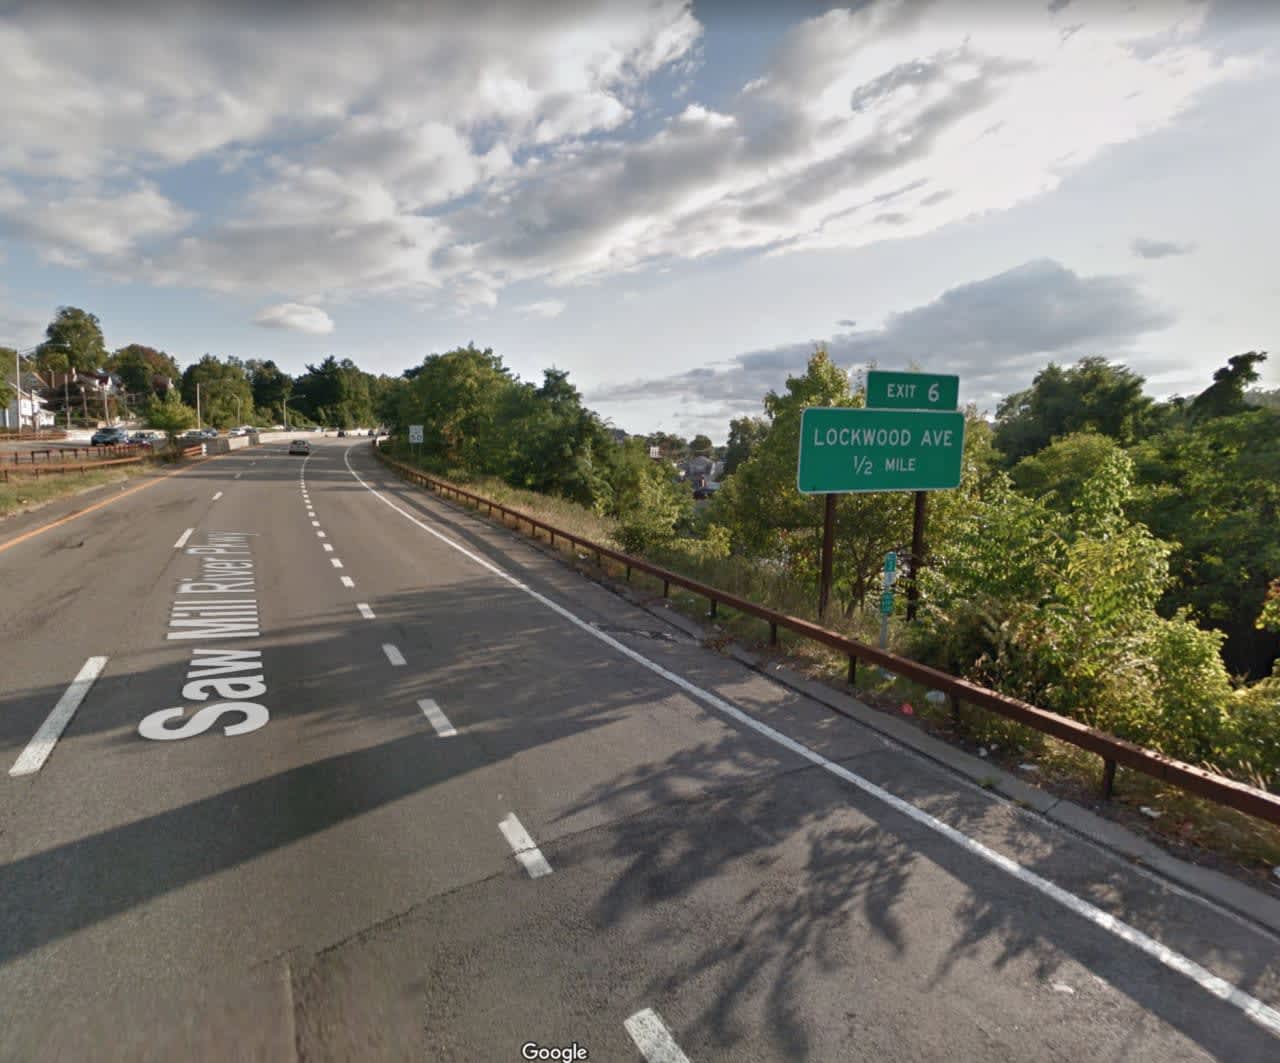 Exit 6 (Lockwood Avenue) on the Saw Mill River Parkway will be closed Friday afternoon and Monday morning in #Yonkers.